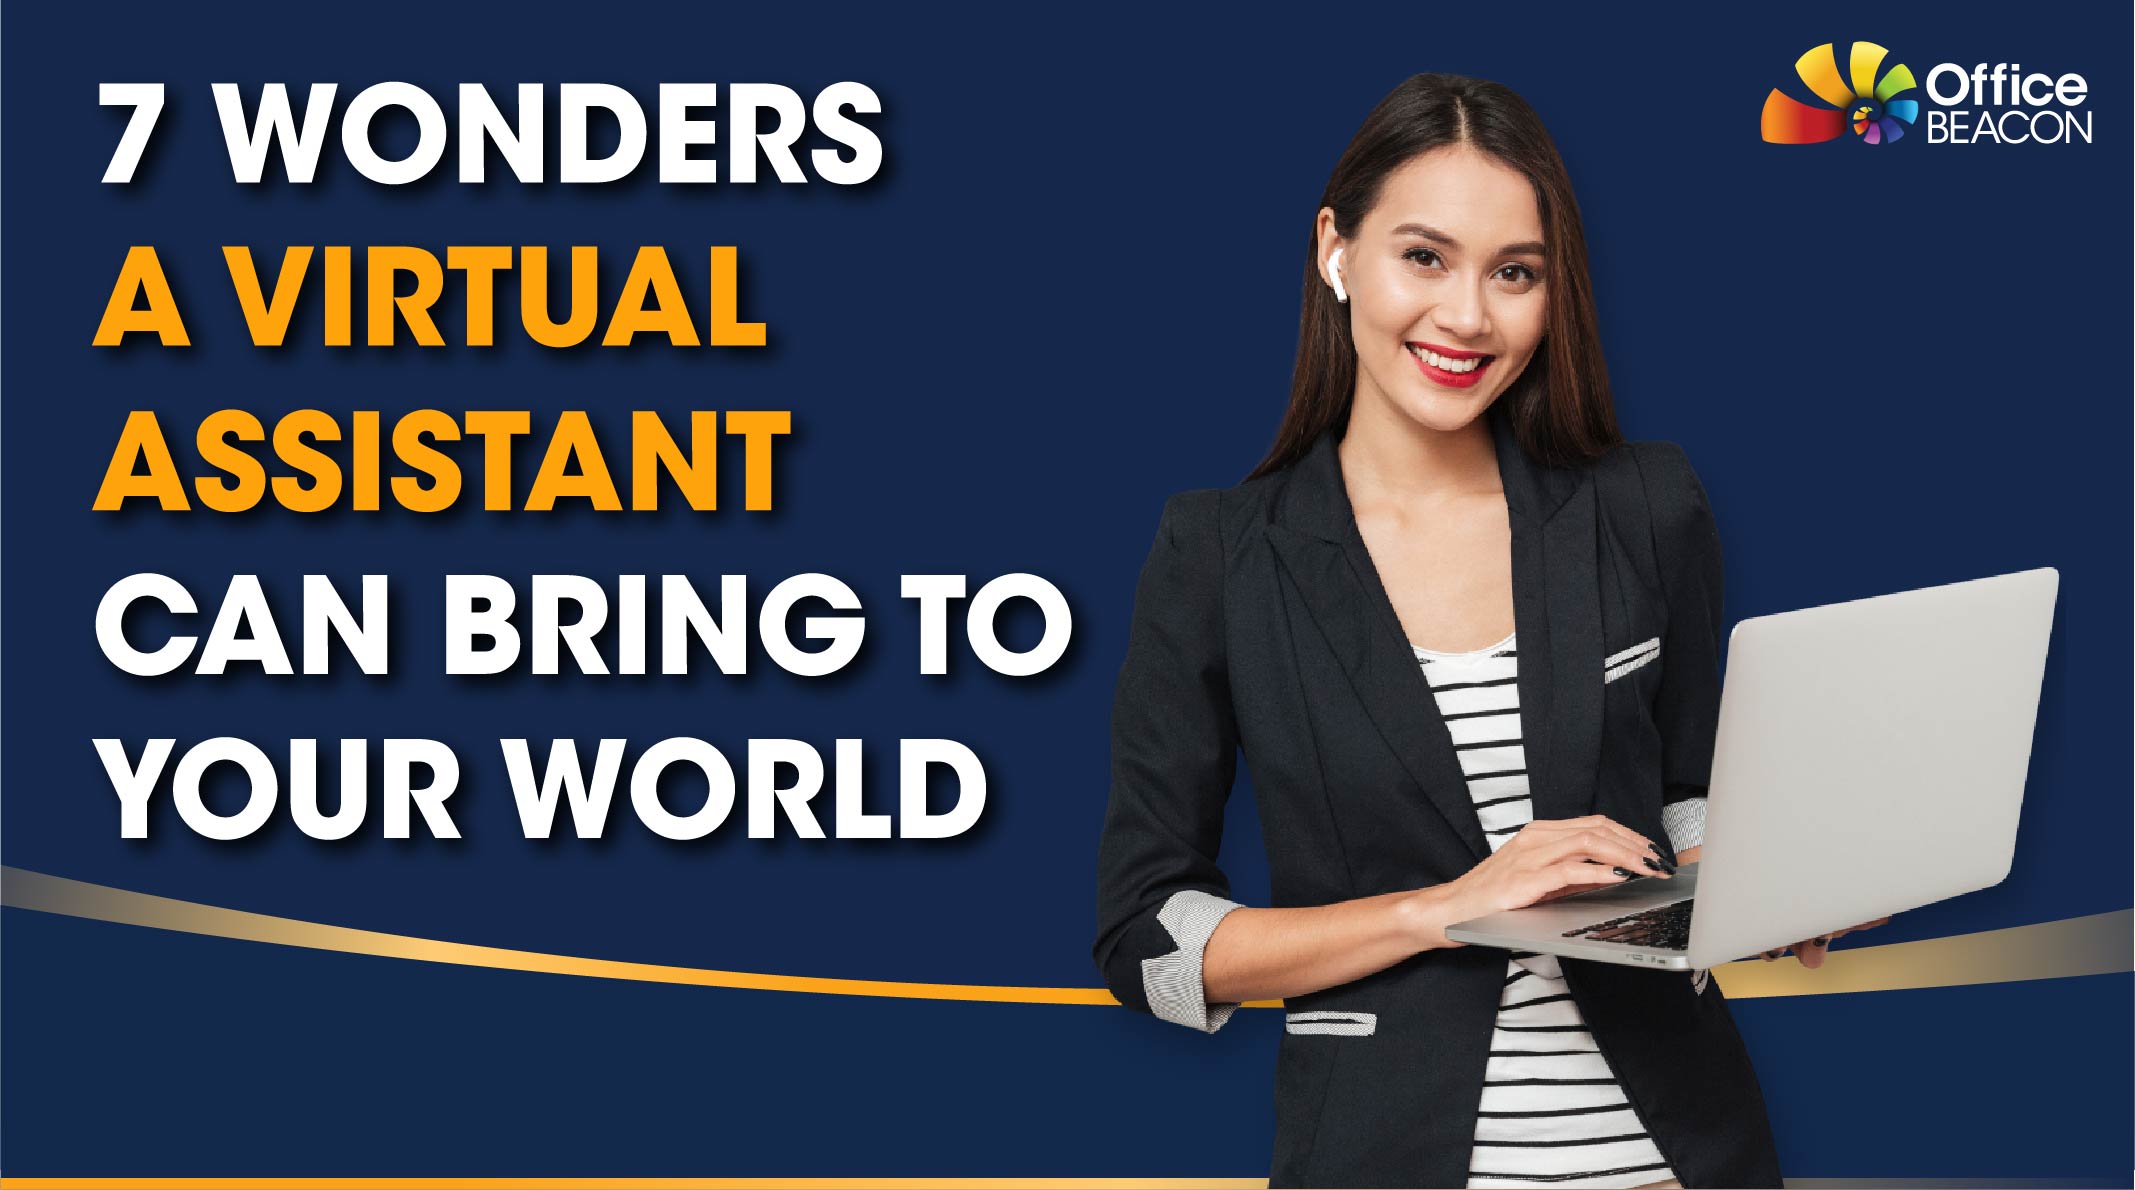 7 wonders a virtual assistant can bring to your world